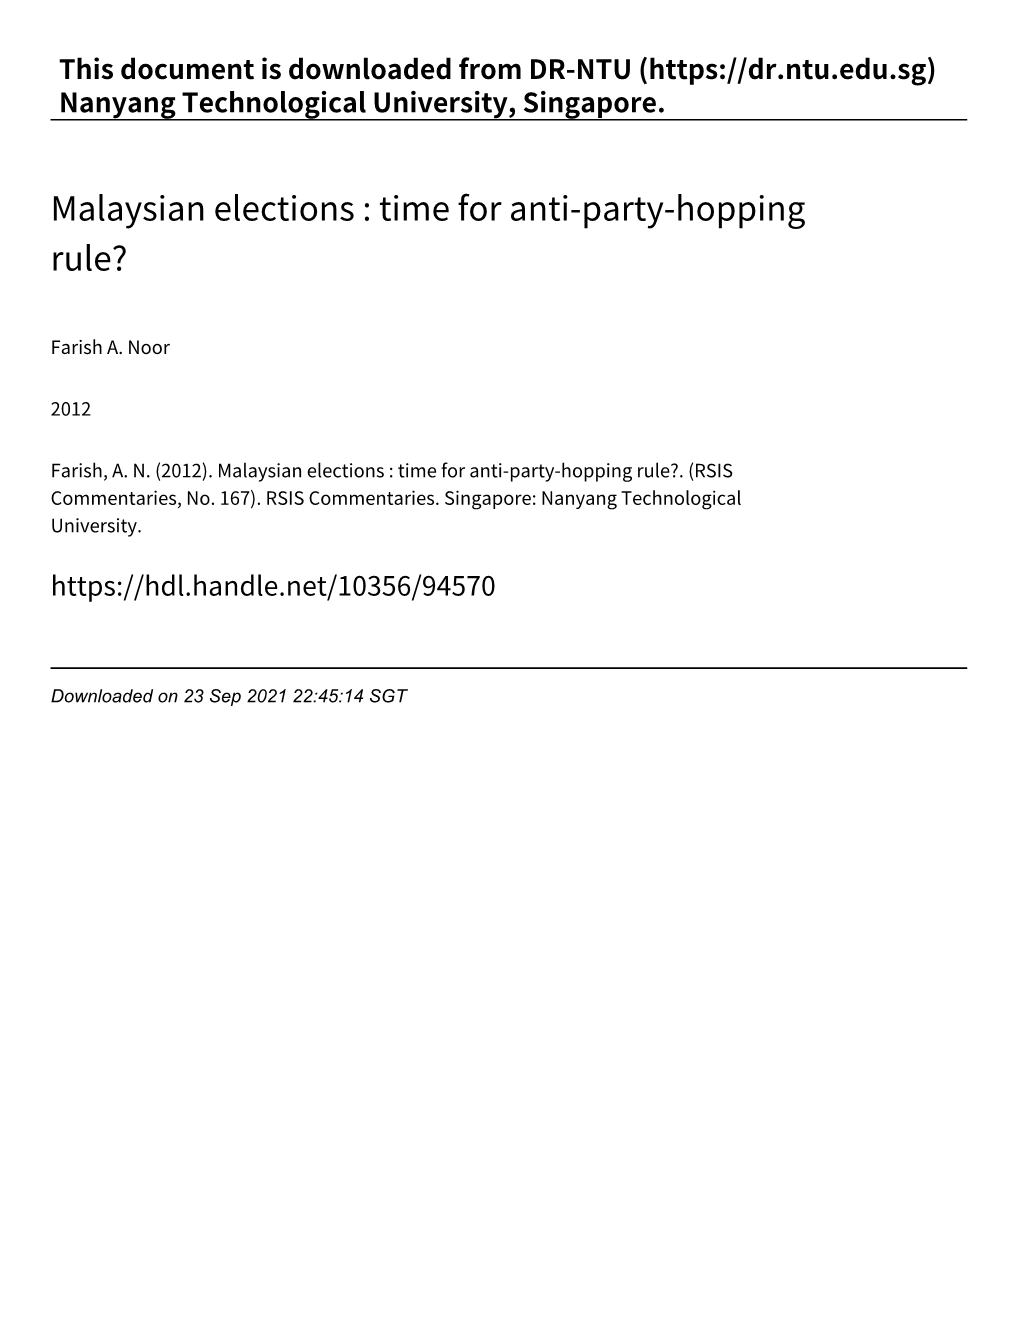 Malaysian Elections : Time for Anti‑Party‑Hopping Rule?